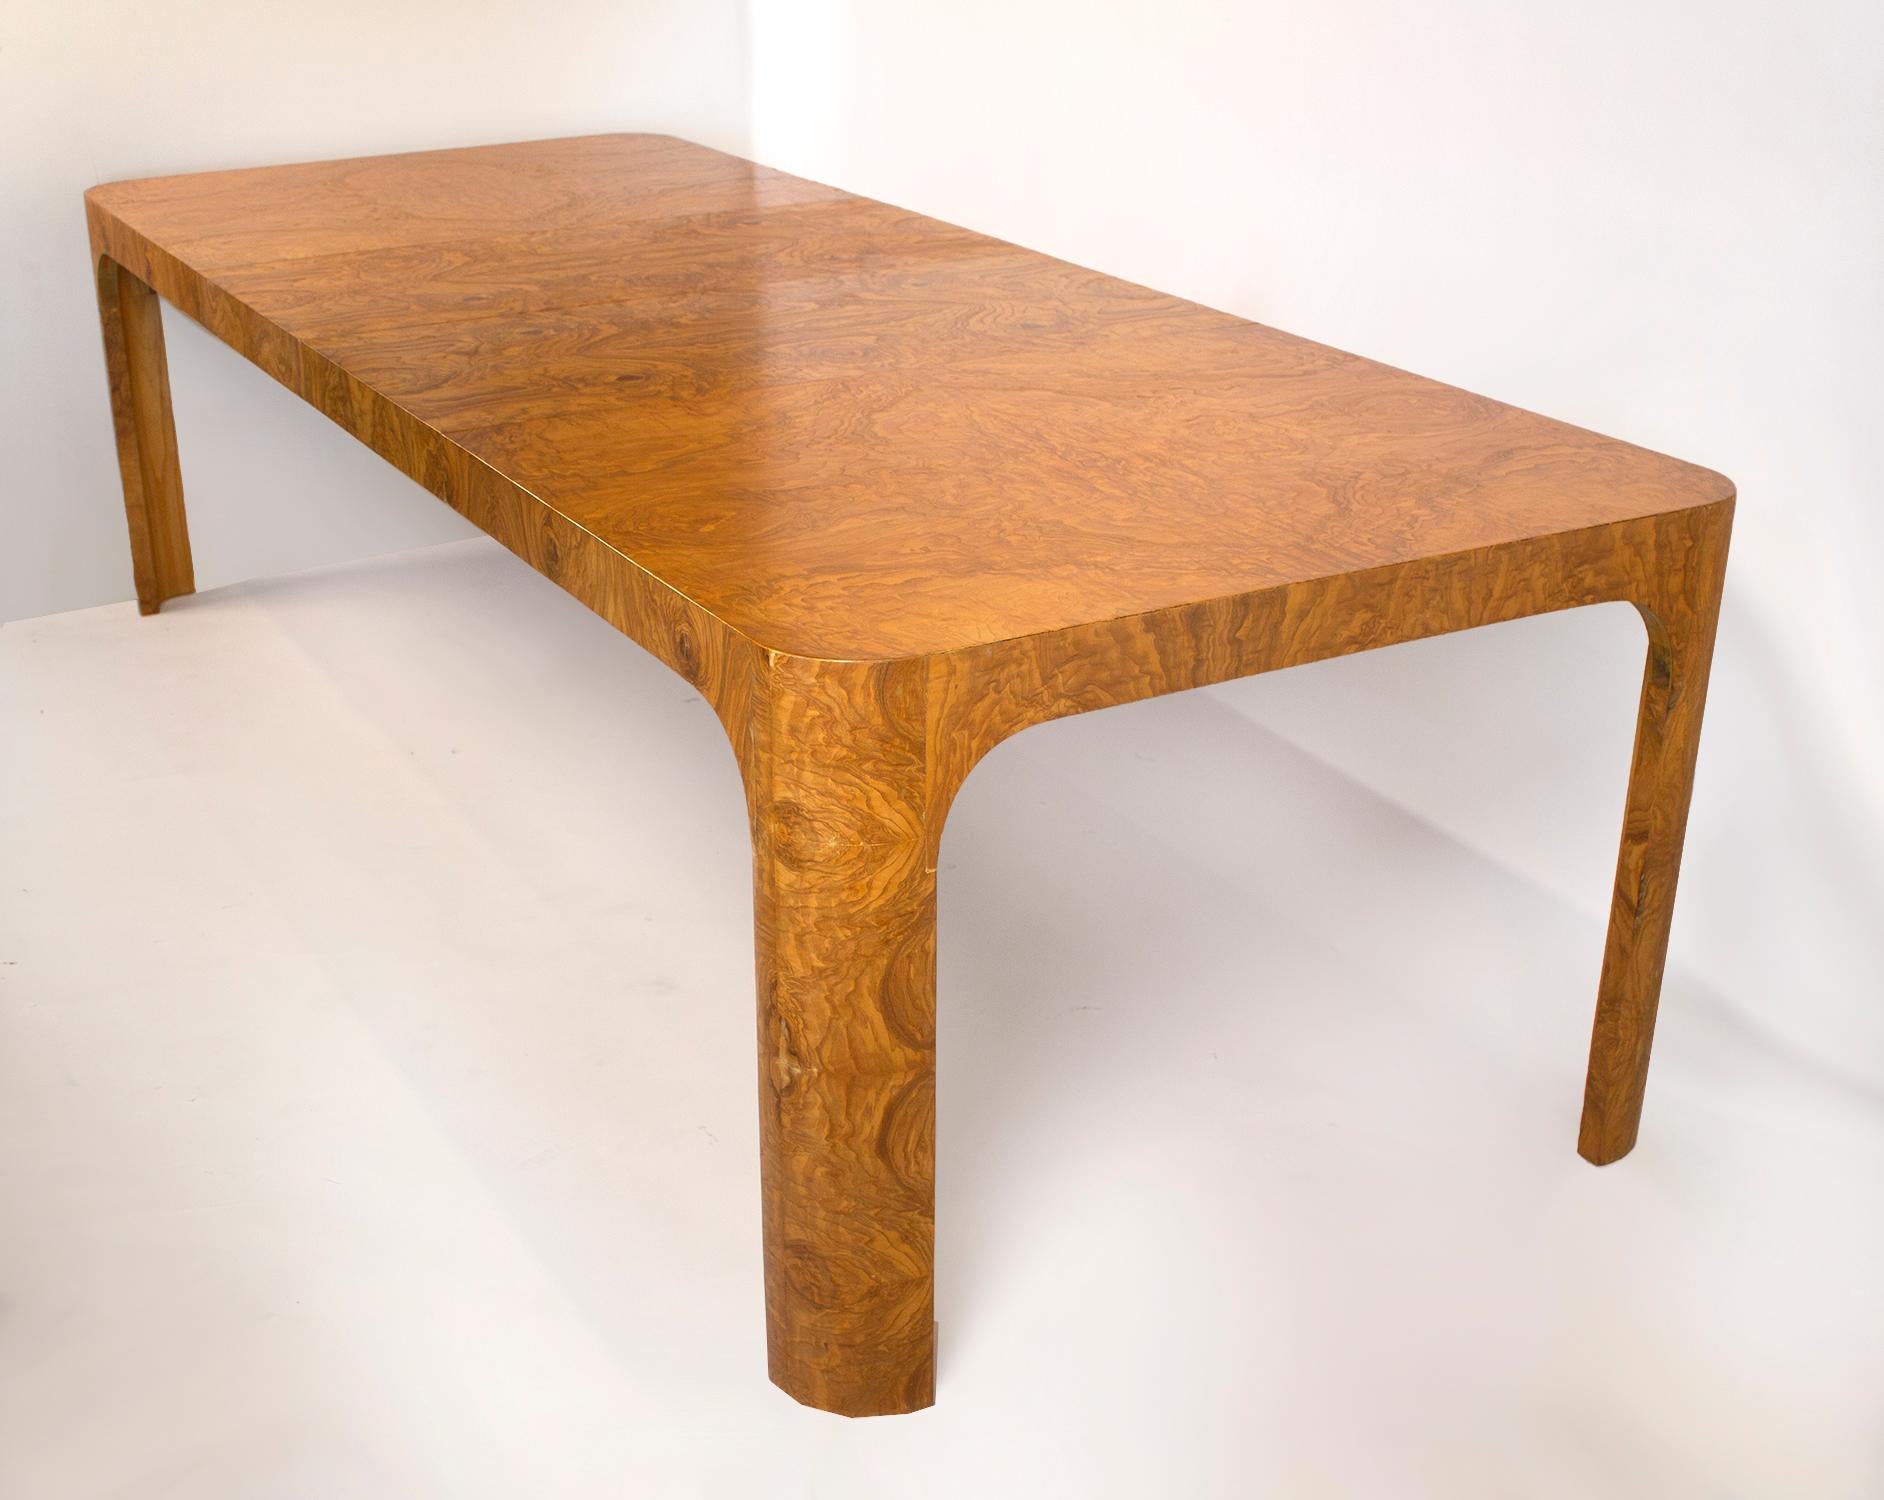 Mid-Century Modern Milo Baughman Dining Table for Thayer Coggin in Olive Burl Wood, 1960s